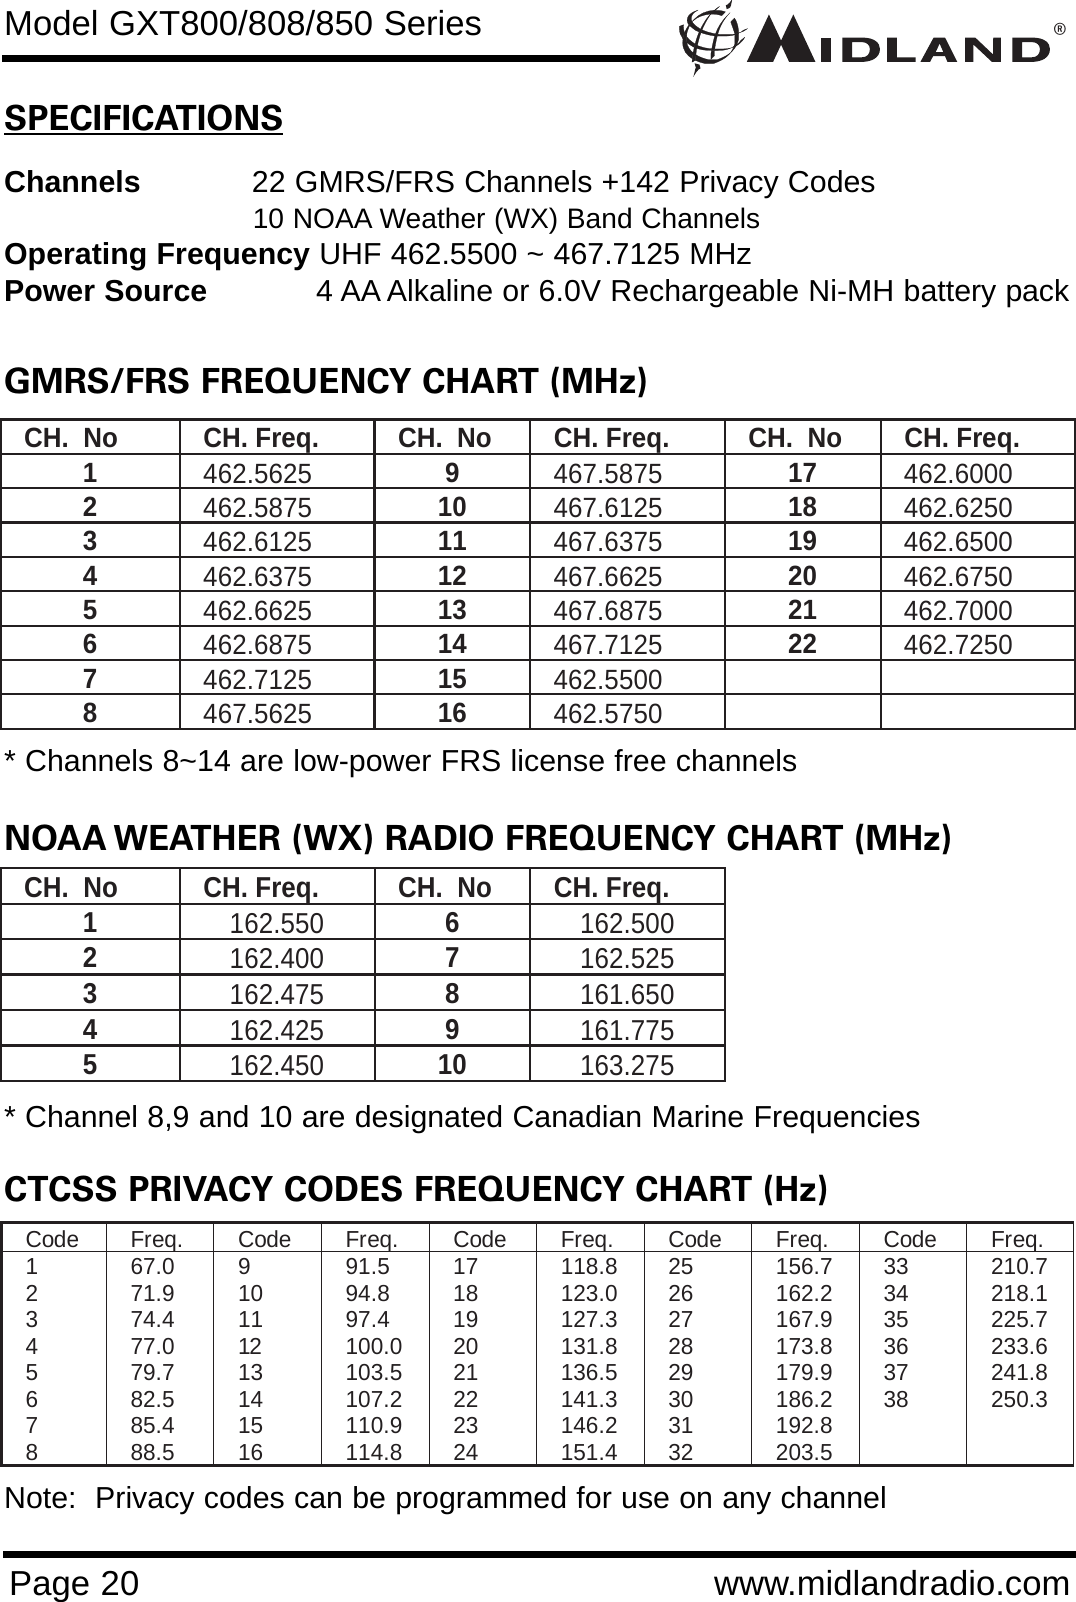 ®Page 20 www.midlandradio.comSPECIFICATIONSChannels 22 GMRS/FRS Channels +142 Privacy Codes10 NOAA Weather (WX) Band Channels Operating Frequency UHF 462.5500 ~ 467.7125 MHzPower Source 4 AA Alkaline or 6.0V Rechargeable Ni-MH battery packGMRS/FRS FREQUENCY CHART (MHz)CH.  No  CH. Freq.  CH.  No  CH. Freq.  CH.  No  CH. Freq. 1  462.5625 9  467.5875 17  462.6000 2  462.5875 10  467.6125 18  462.6250 3  462.6125 11  467.6375 19  462.6500 4  462.6375 12  467.6625 20  462.6750 5  462.6625 13  467.6875 21  462.7000 6  462.6875 14  467.7125 22  462.7250 7  462.7125 15  462.5500   8  467.5625 16  462.5750   NOAA WEATHER (WX) RADIO FREQUENCY CHART (MHz)CH.  No  CH. Freq.  CH.  No  CH. Freq. 1  162.550 6  162.500 2  162.400 7  162.525 3  162.475 8  161.650 4  162.425 9  161.775 5  162.450 10  163.275 CTCSS PRIVACY CODES FREQUENCY CHART (Hz)Code Freq.  Code Freq.  Code Freq.  Code Freq.  Code Freq.  1  67.0 9  91.5 17  118.8 25  156.7 33  210.7 2  71.9 10  94.8 18  123.0 26  162.2 34  218.1 3  74.4 11  97.4 19  127.3 27  167.9 35  225.7 4 77.0 12 100.0 20  131.8 28  173.8 36  233.6 5 79.7 13 103.5 21  136.5 29  179.9 37  241.8 6 82.5 14 107.2 22  141.3 30  186.2 38  250.3 7 85.4 15 110.9 23  146.2 31  192.8    8 88.5 16 114.8 24  151.4 32  203.5    * Channel 8,9 and 10 are designated Canadian Marine Frequencies* Channels 8~14 are low-power FRS license free channelsNote:  Privacy codes can be programmed for use on any channelModel GXT800/808/850 Series